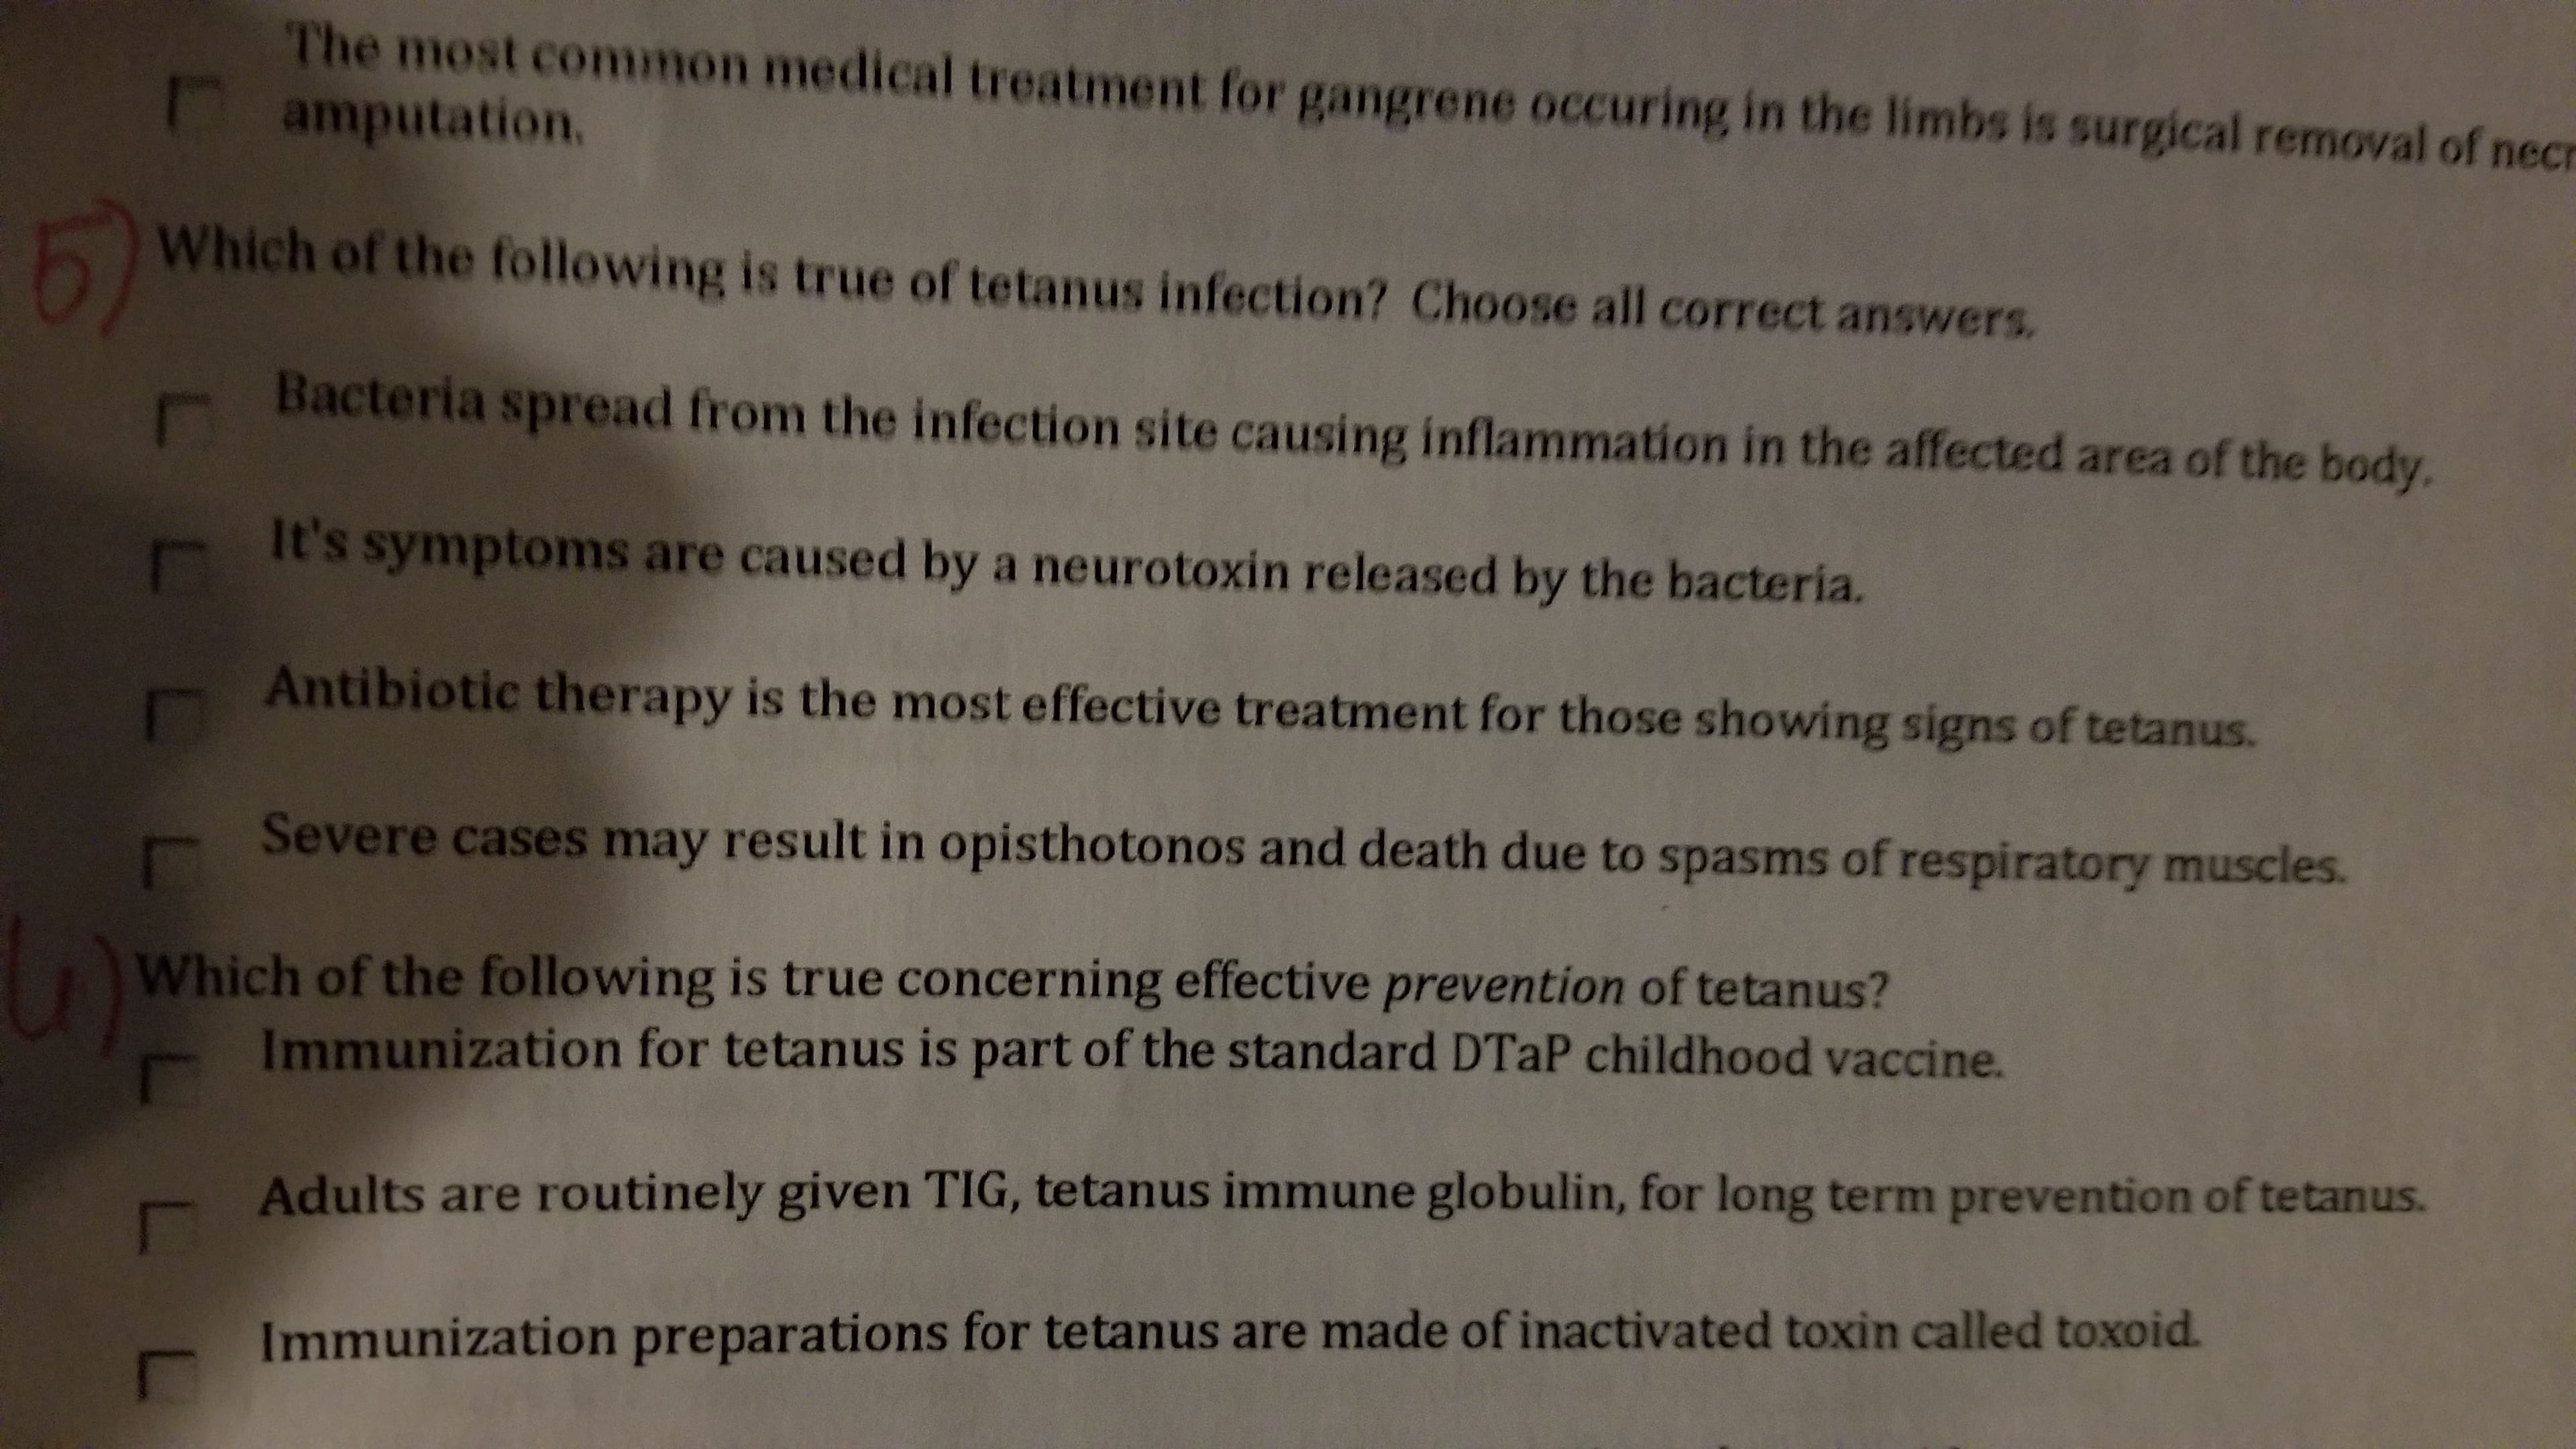 The most common medical treatment for gangrene occuring in the limbs is surgical removal of necr
amputation,
5)
Which of the following is true of tetanus infection? Choose all correct answers.
Bacteria spread from the infection site causing inflammation in the affected area of the body.
It's symptoms are caused by a neurotoxin released by the bacteria.
Antibiotic therapy is the most effective treatment for those showing signs of tetanus.
Severe cases may result in opisthotonos and death due to spasms of respiratory muscles.
Which of the following is true concerning effective prevention of tetanus?
Immunization for tetanus is part of the standard DTaP childhood vaccine.
Adults are routinely given TIG, tetanus immune globulin, for long term prevention of tetanus.
Immunization preparations for tetanus are made of inactivated toxin called toxoid.
